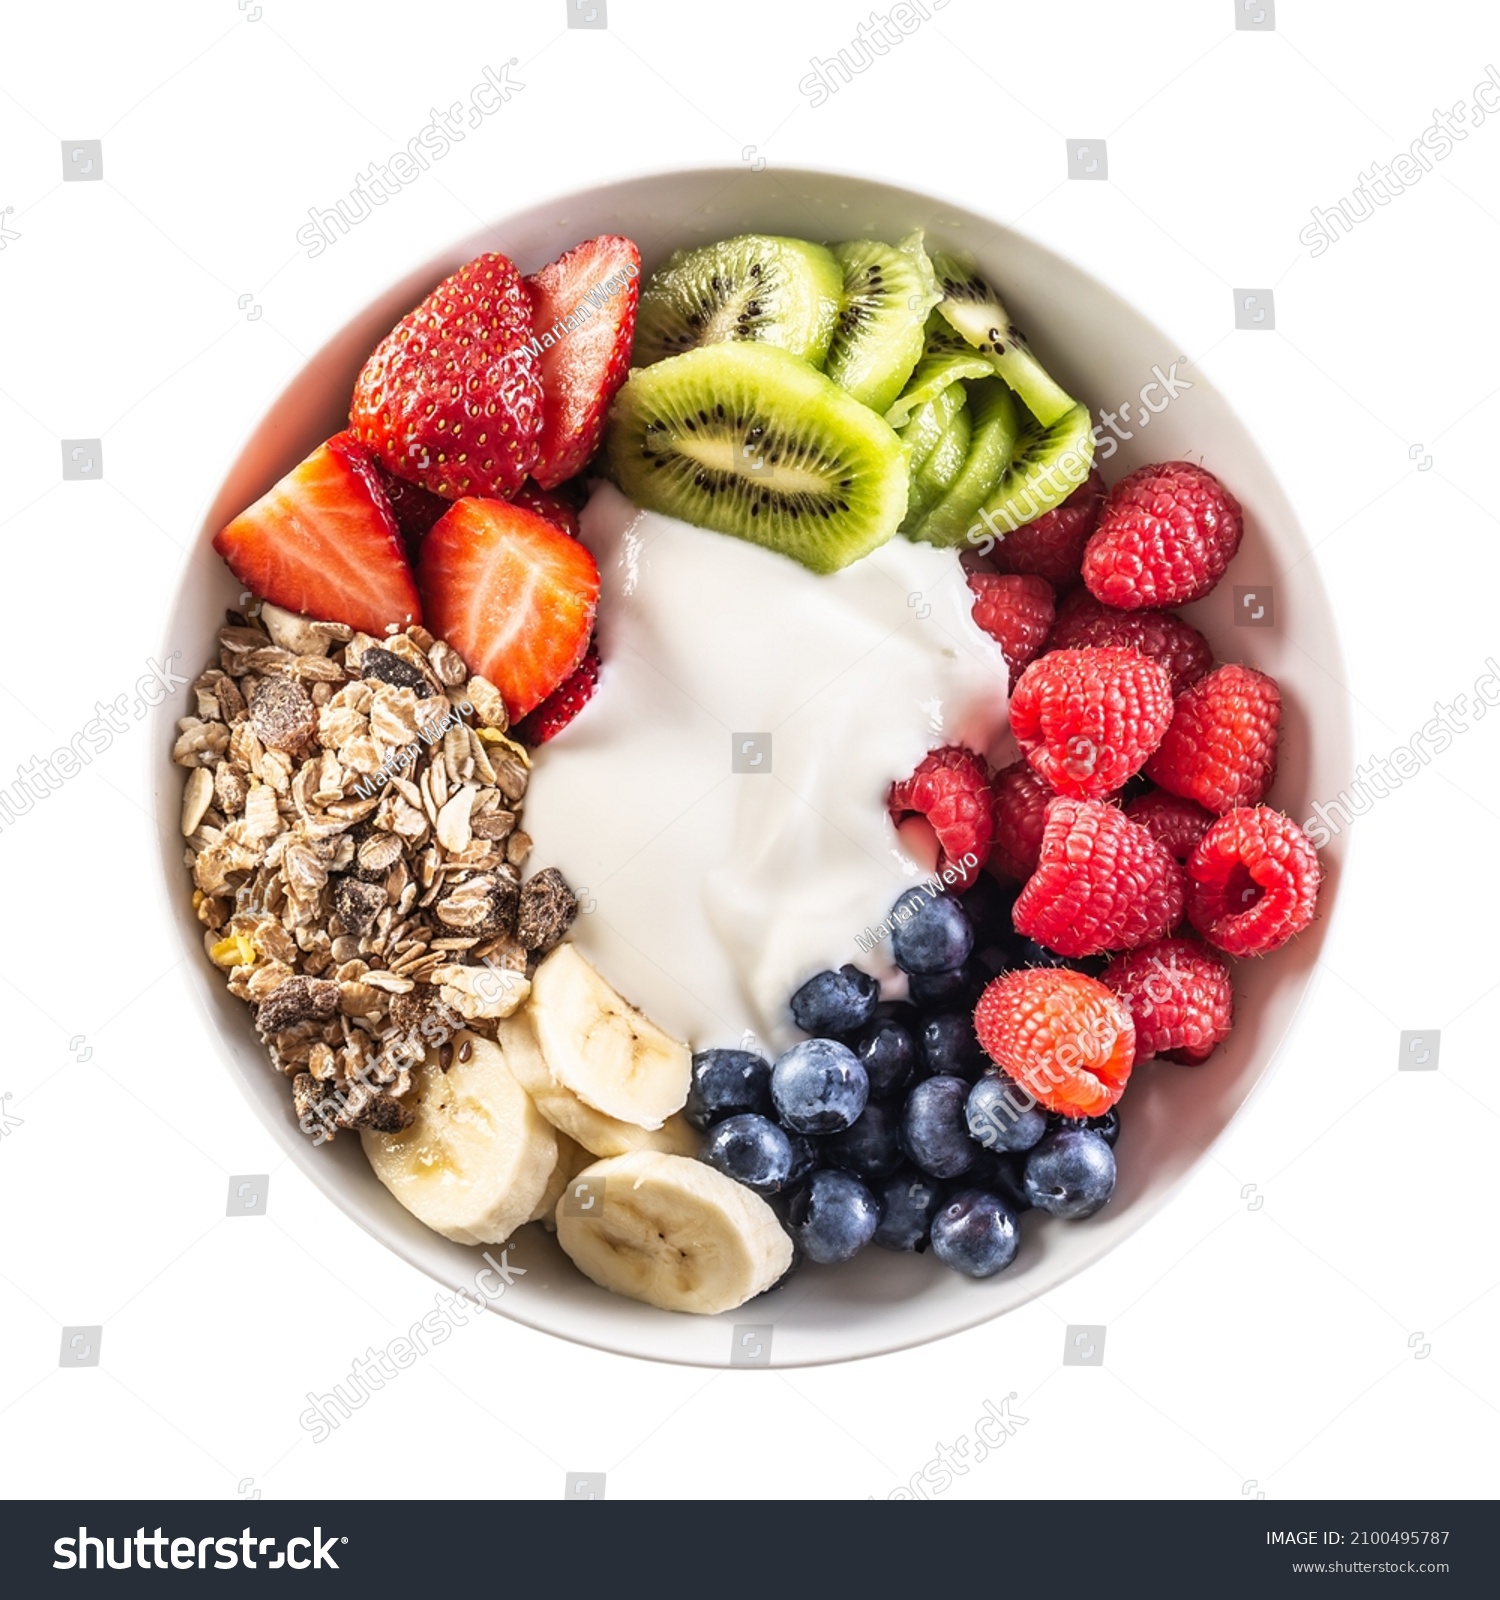 Top view of isolated fruit and yoghurt bowl with cereals, kiwi, strawberries, banana, blueberries and raspberries. #2100495787